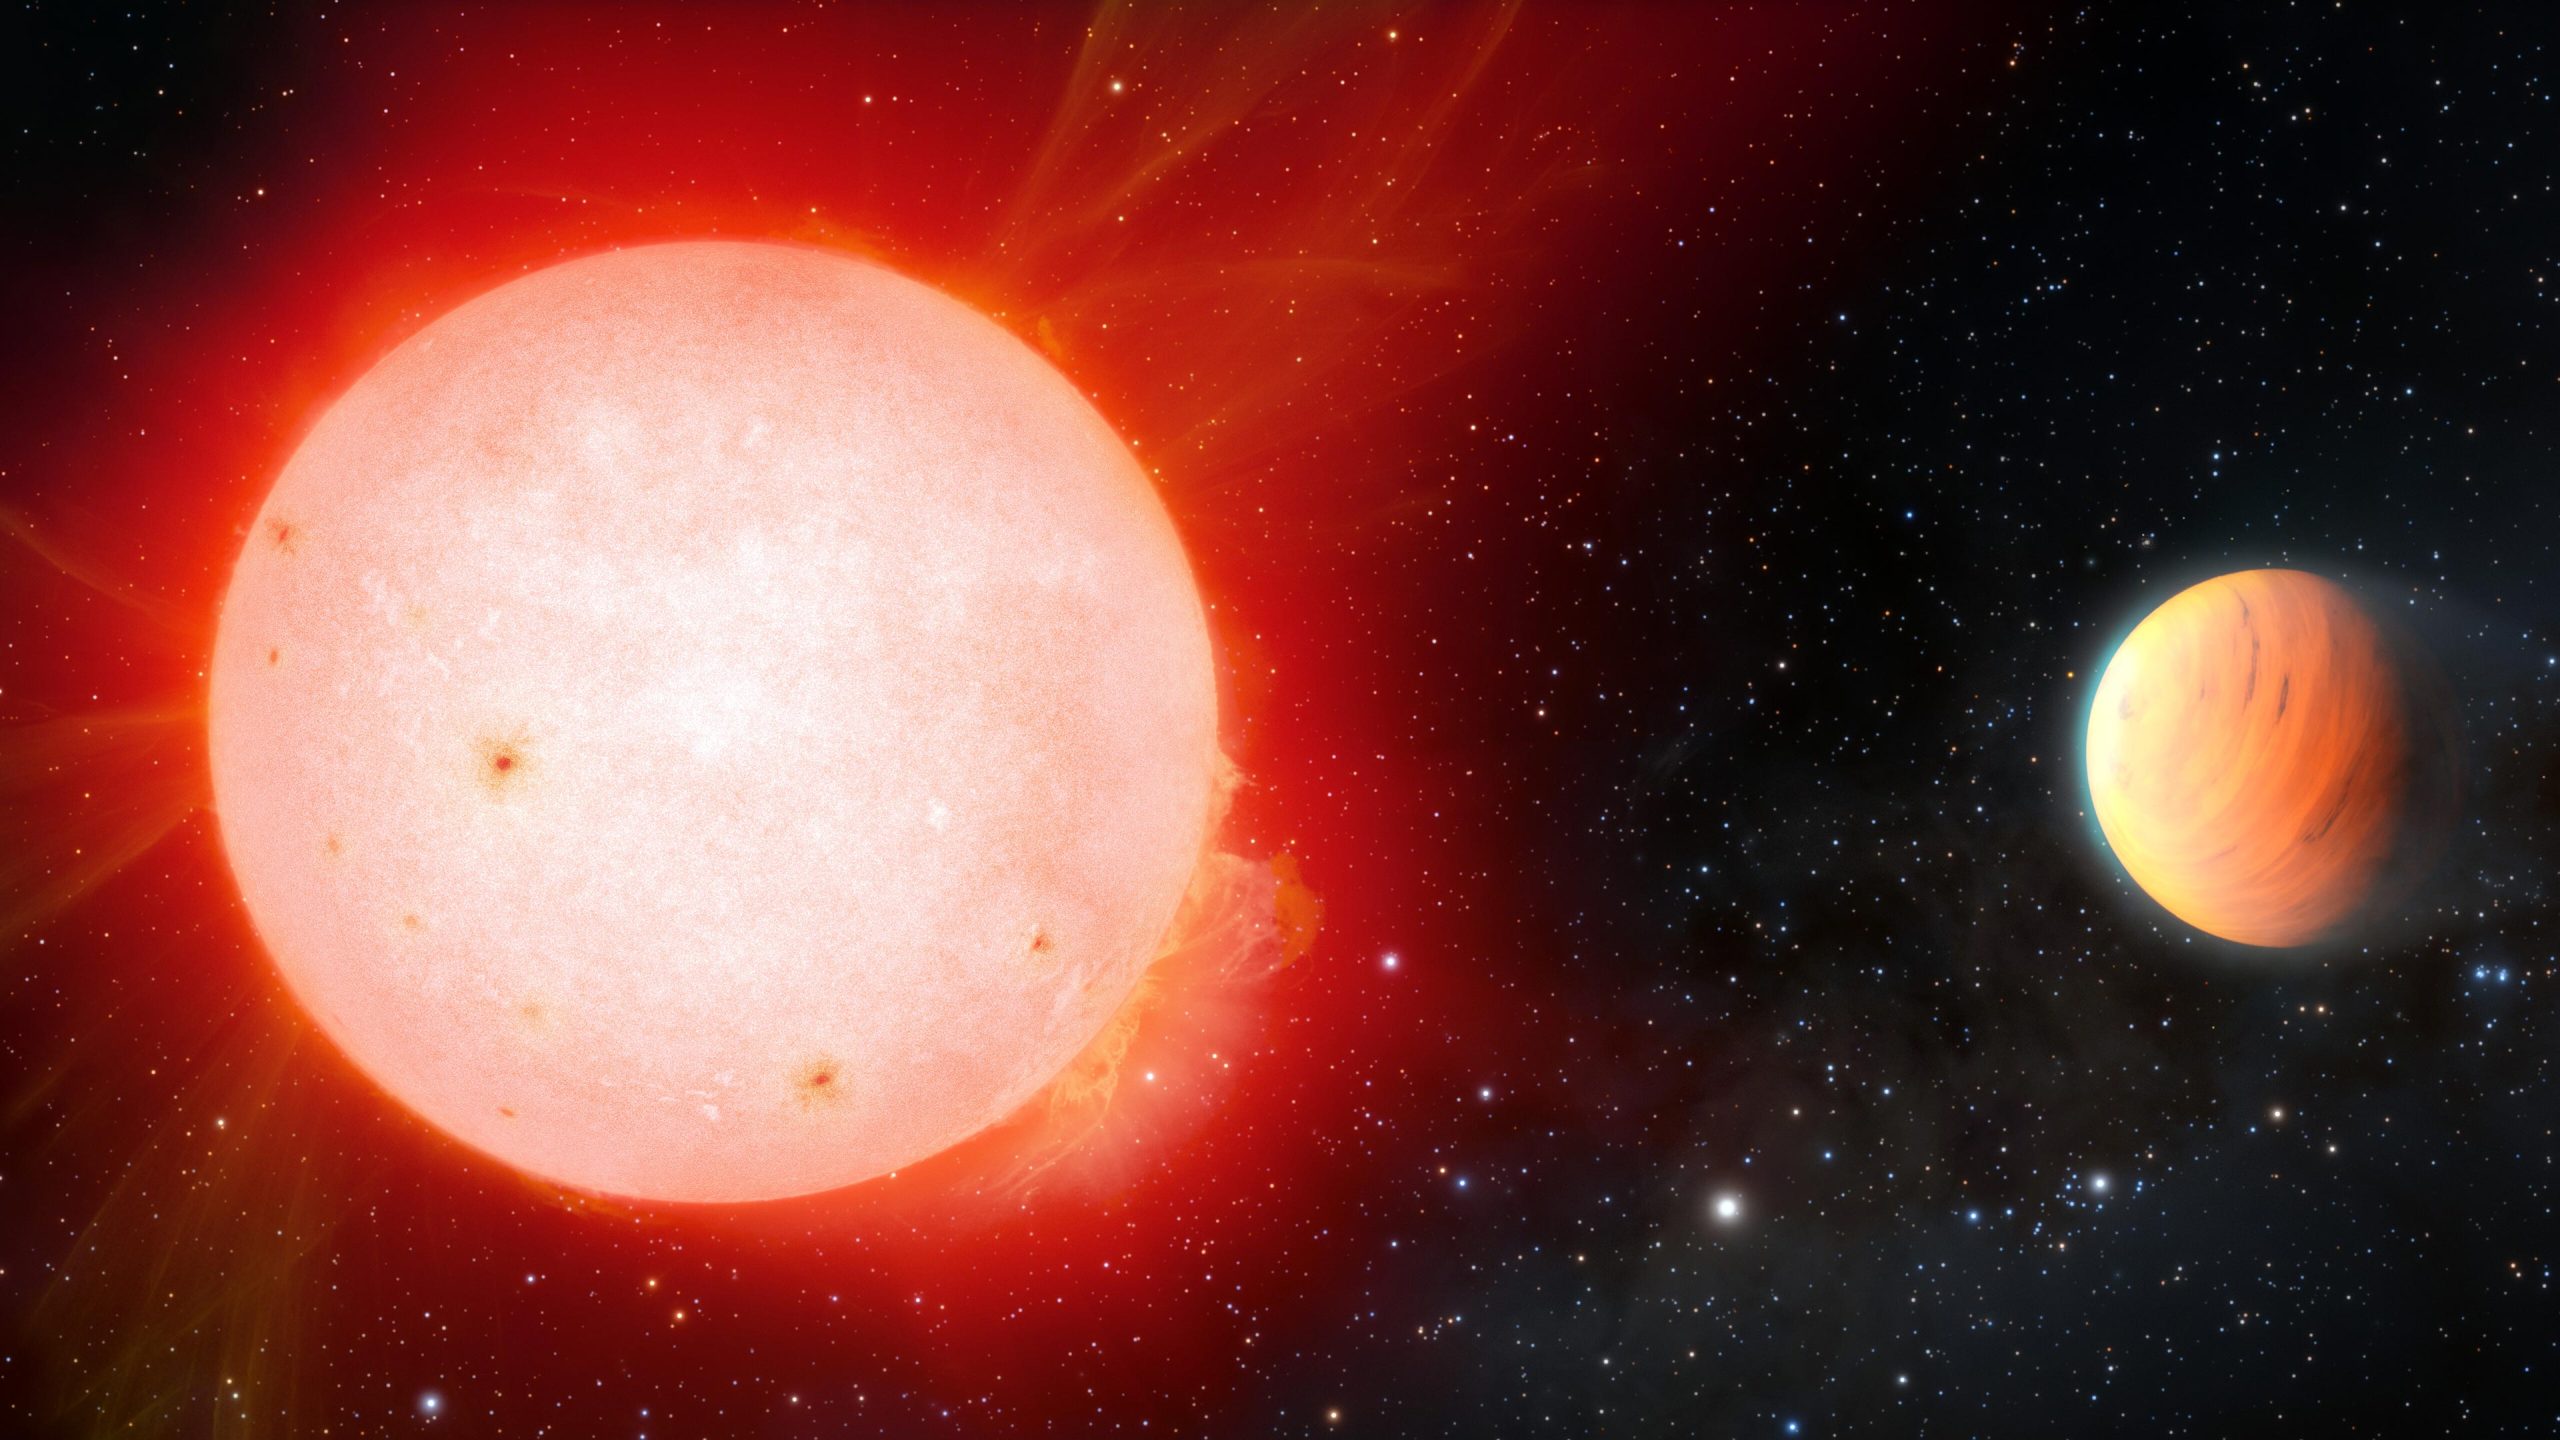 "Marshmallow" world discovered: giant, fluffy planet orbiting a red dwarf star